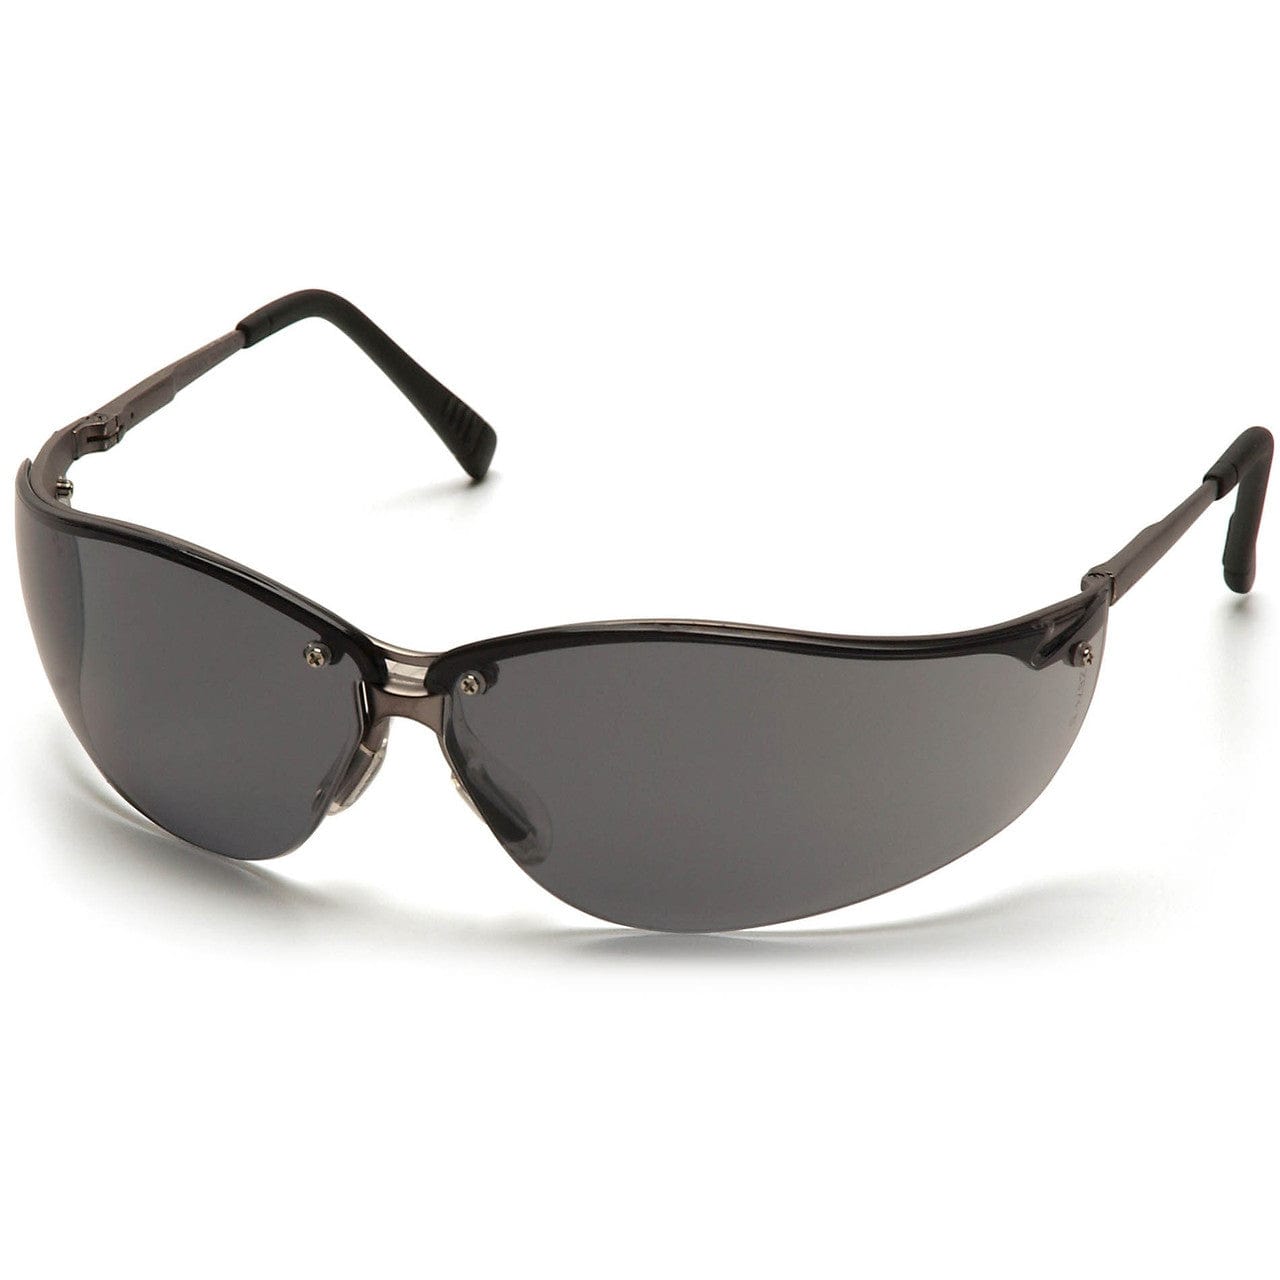 Pyramex V2 Metal Safety Glasses with Gray Lens SGM1820S